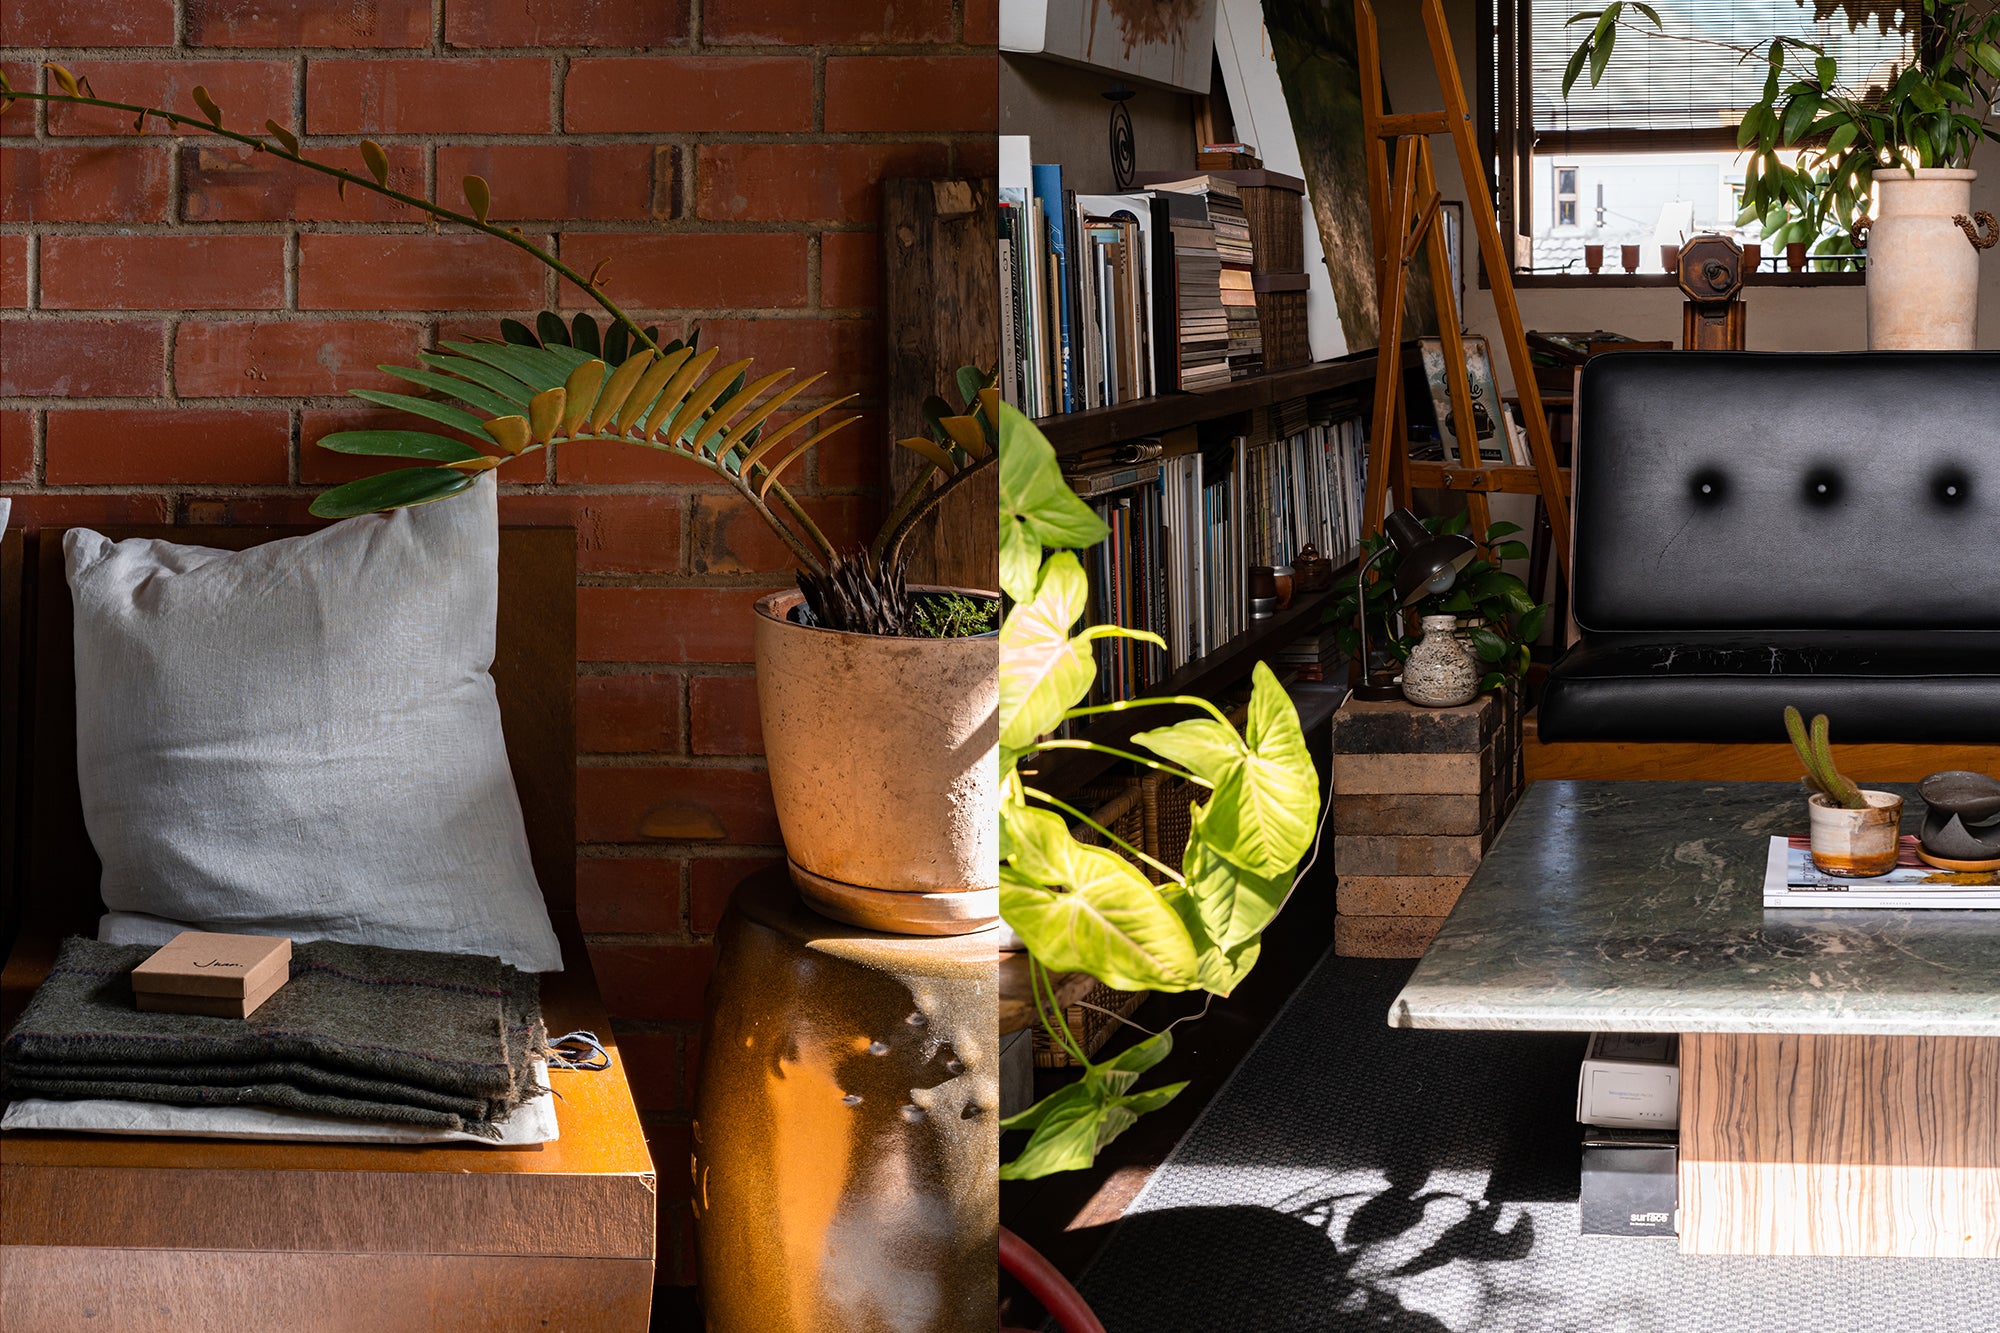 secondhand vintage chair and items with house plants